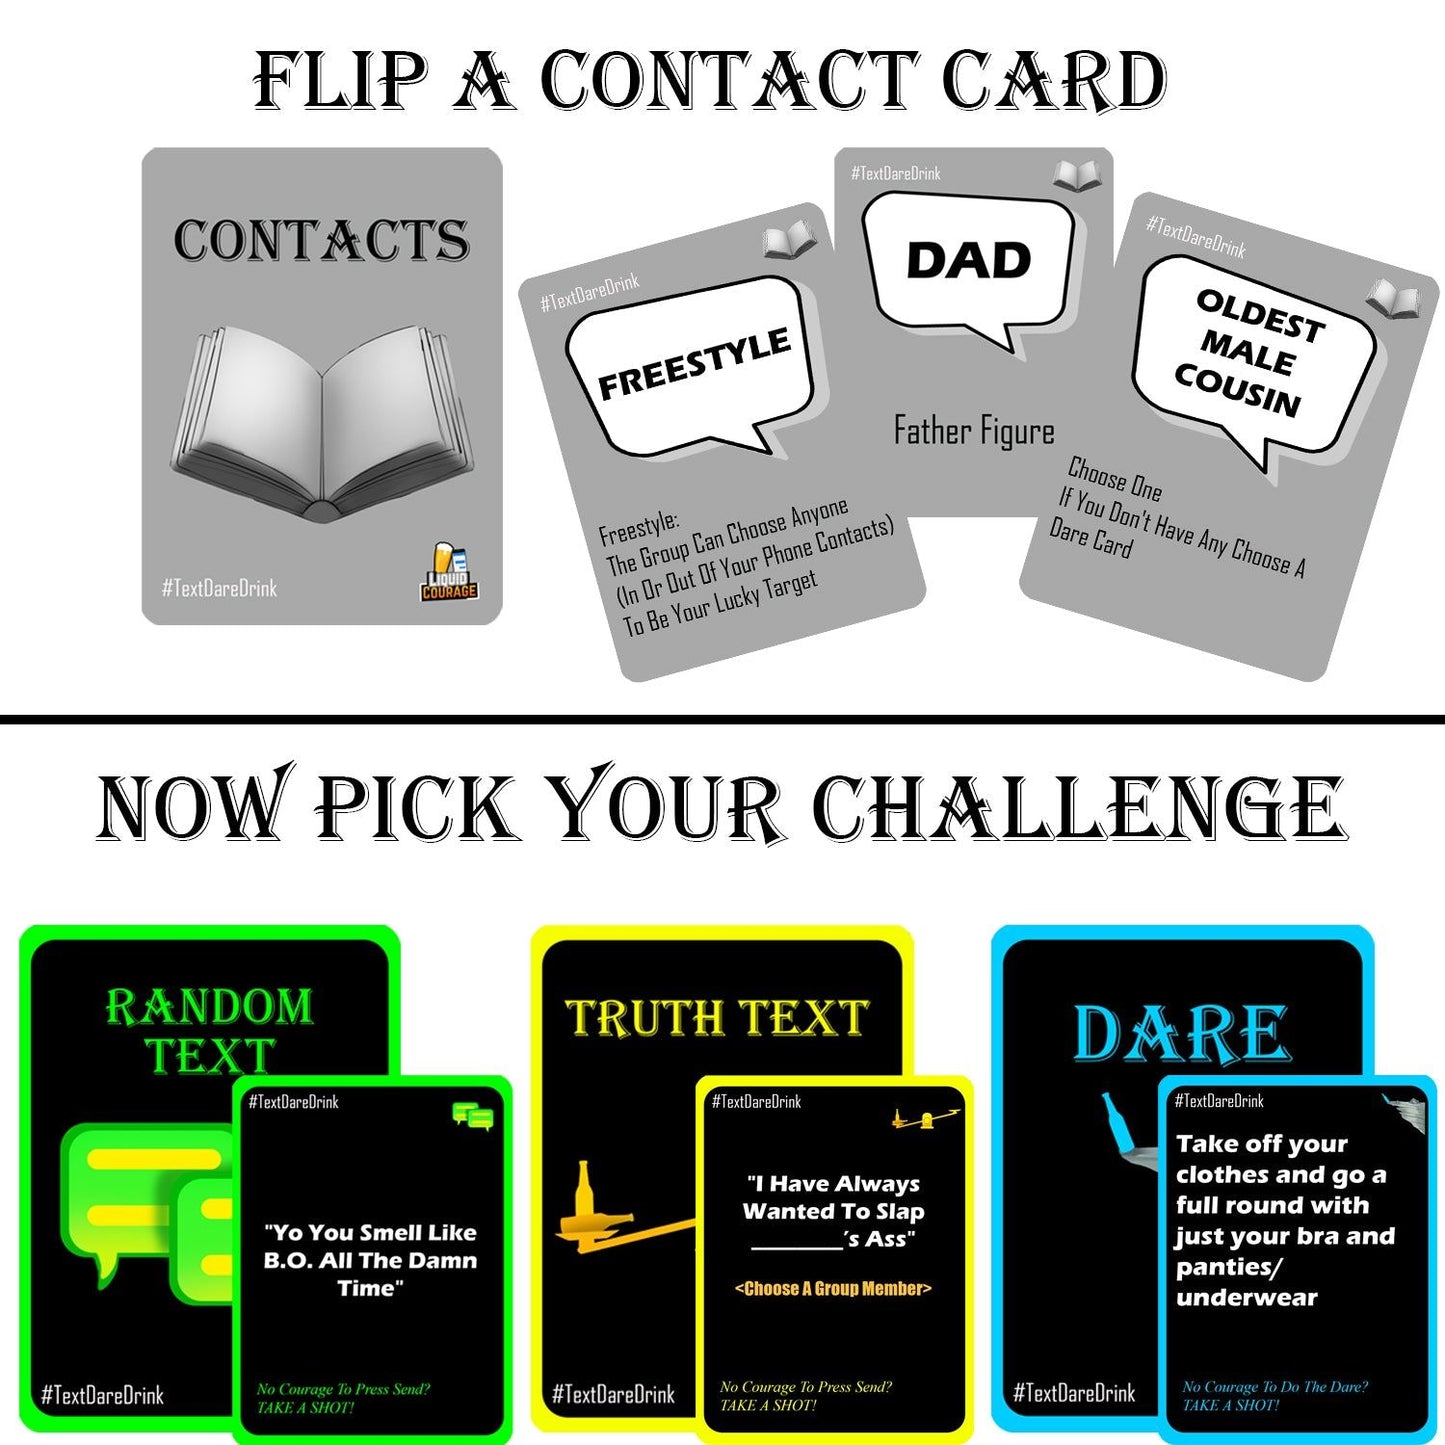 Liquid Courage – Hilarious, Fun Adult Drinking Card Game for Parties Text - Dare - Drink + Bonus 90 Card Expansion Pack - W4W Products 